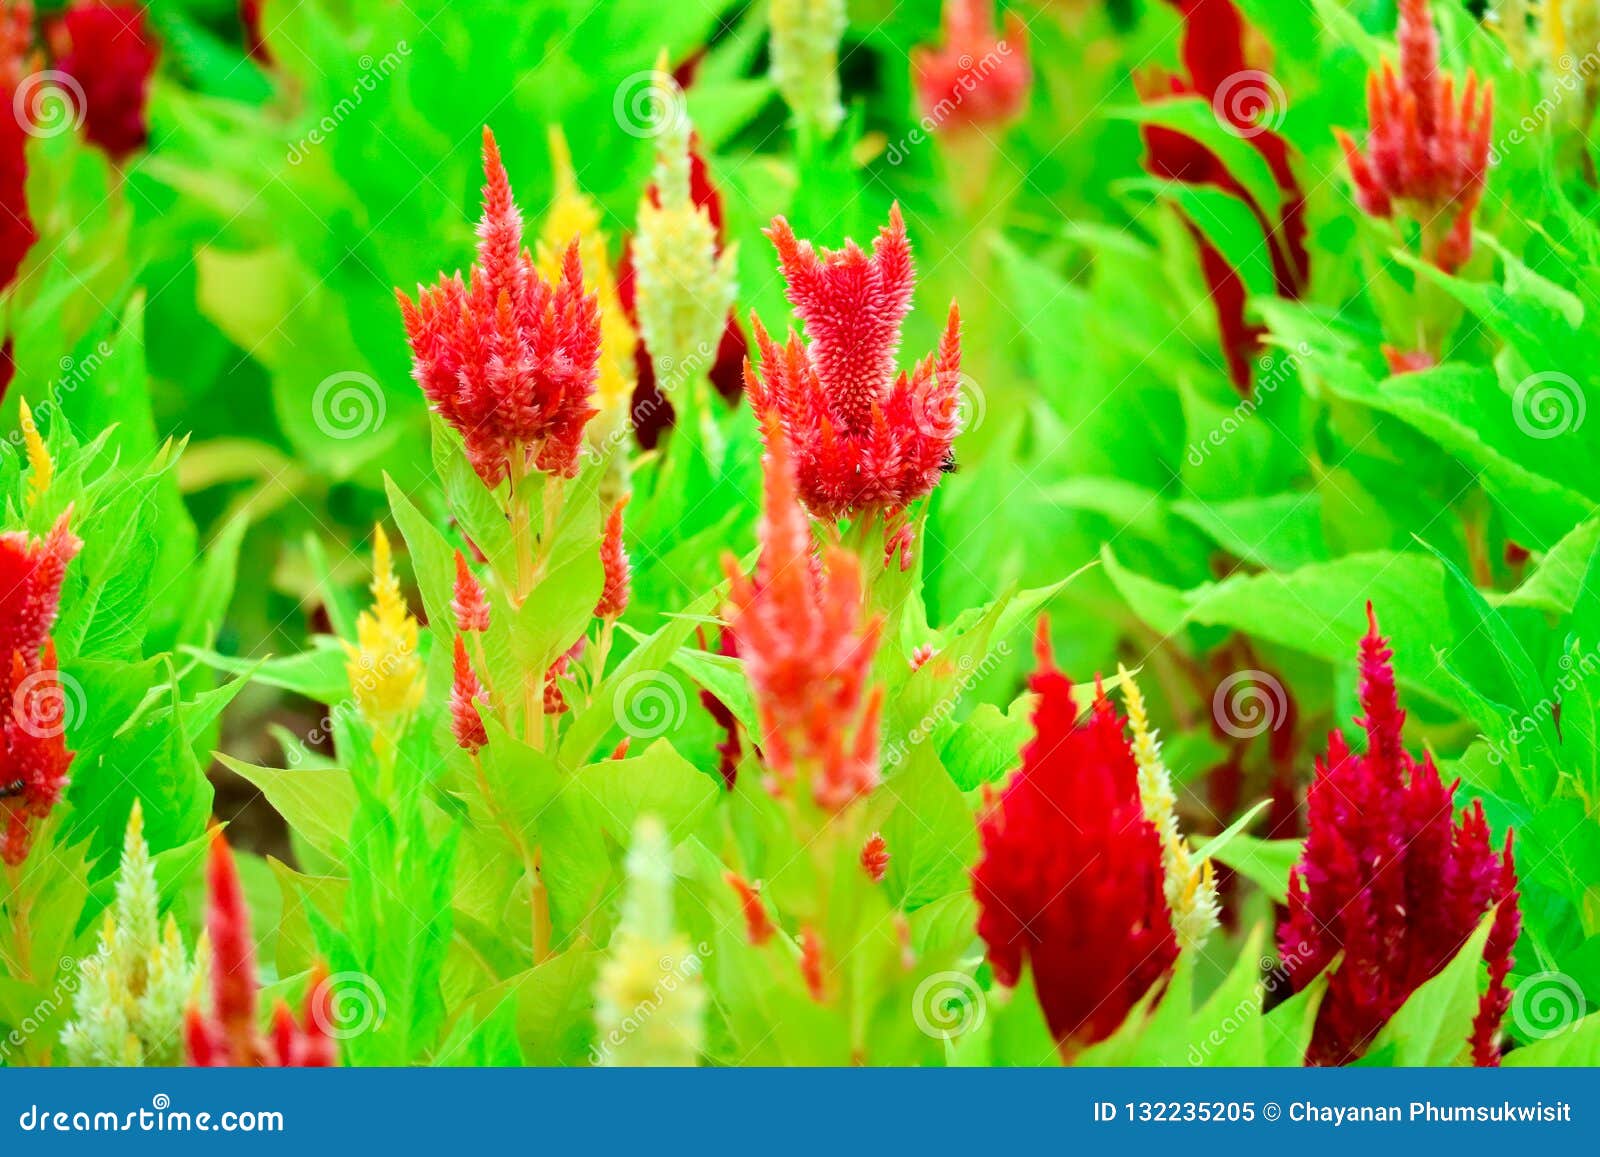 Celosia Flower Bouquet Is Bloom In Garden During The Summer Stock Image Image Of Annual Colorful 132235205